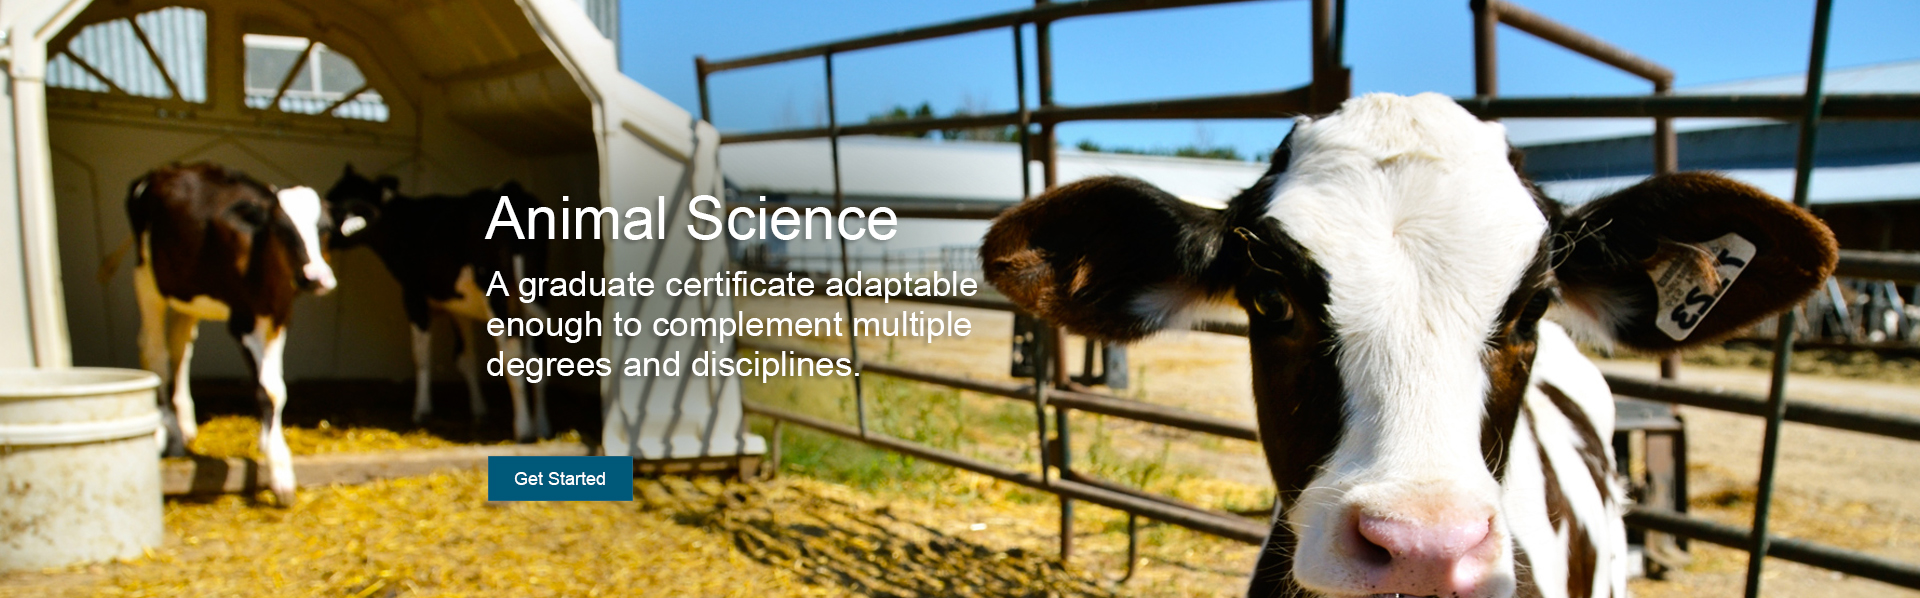 The online animal science graduate certificate is adaptable enough to complement multiple degrees & disciplines by providing foundational courses in nutrition, breeding & genetics, meat science, and more.